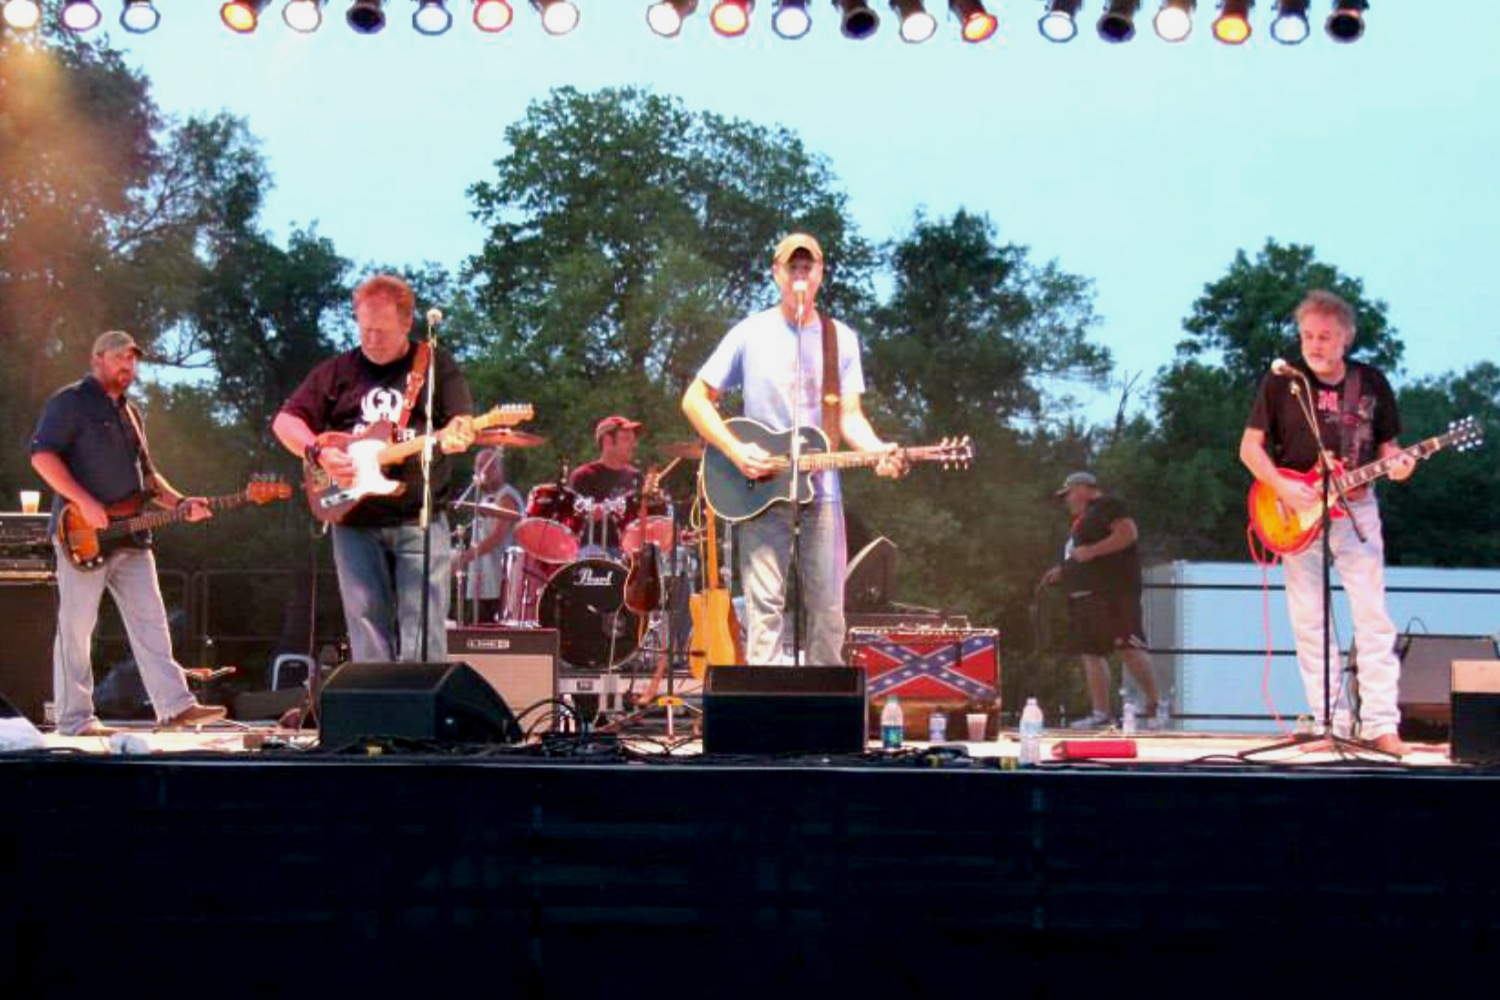 Live Music featuring Cactus Flats at 
						Thunder by the River in Wisner, Nebraska - 
						Northeast Nebraska Musicians Cactus Flats   
						performing live  
						at Thunder By The River in Wisner, Nebraska  
						on Saturday, August 20, 2016.